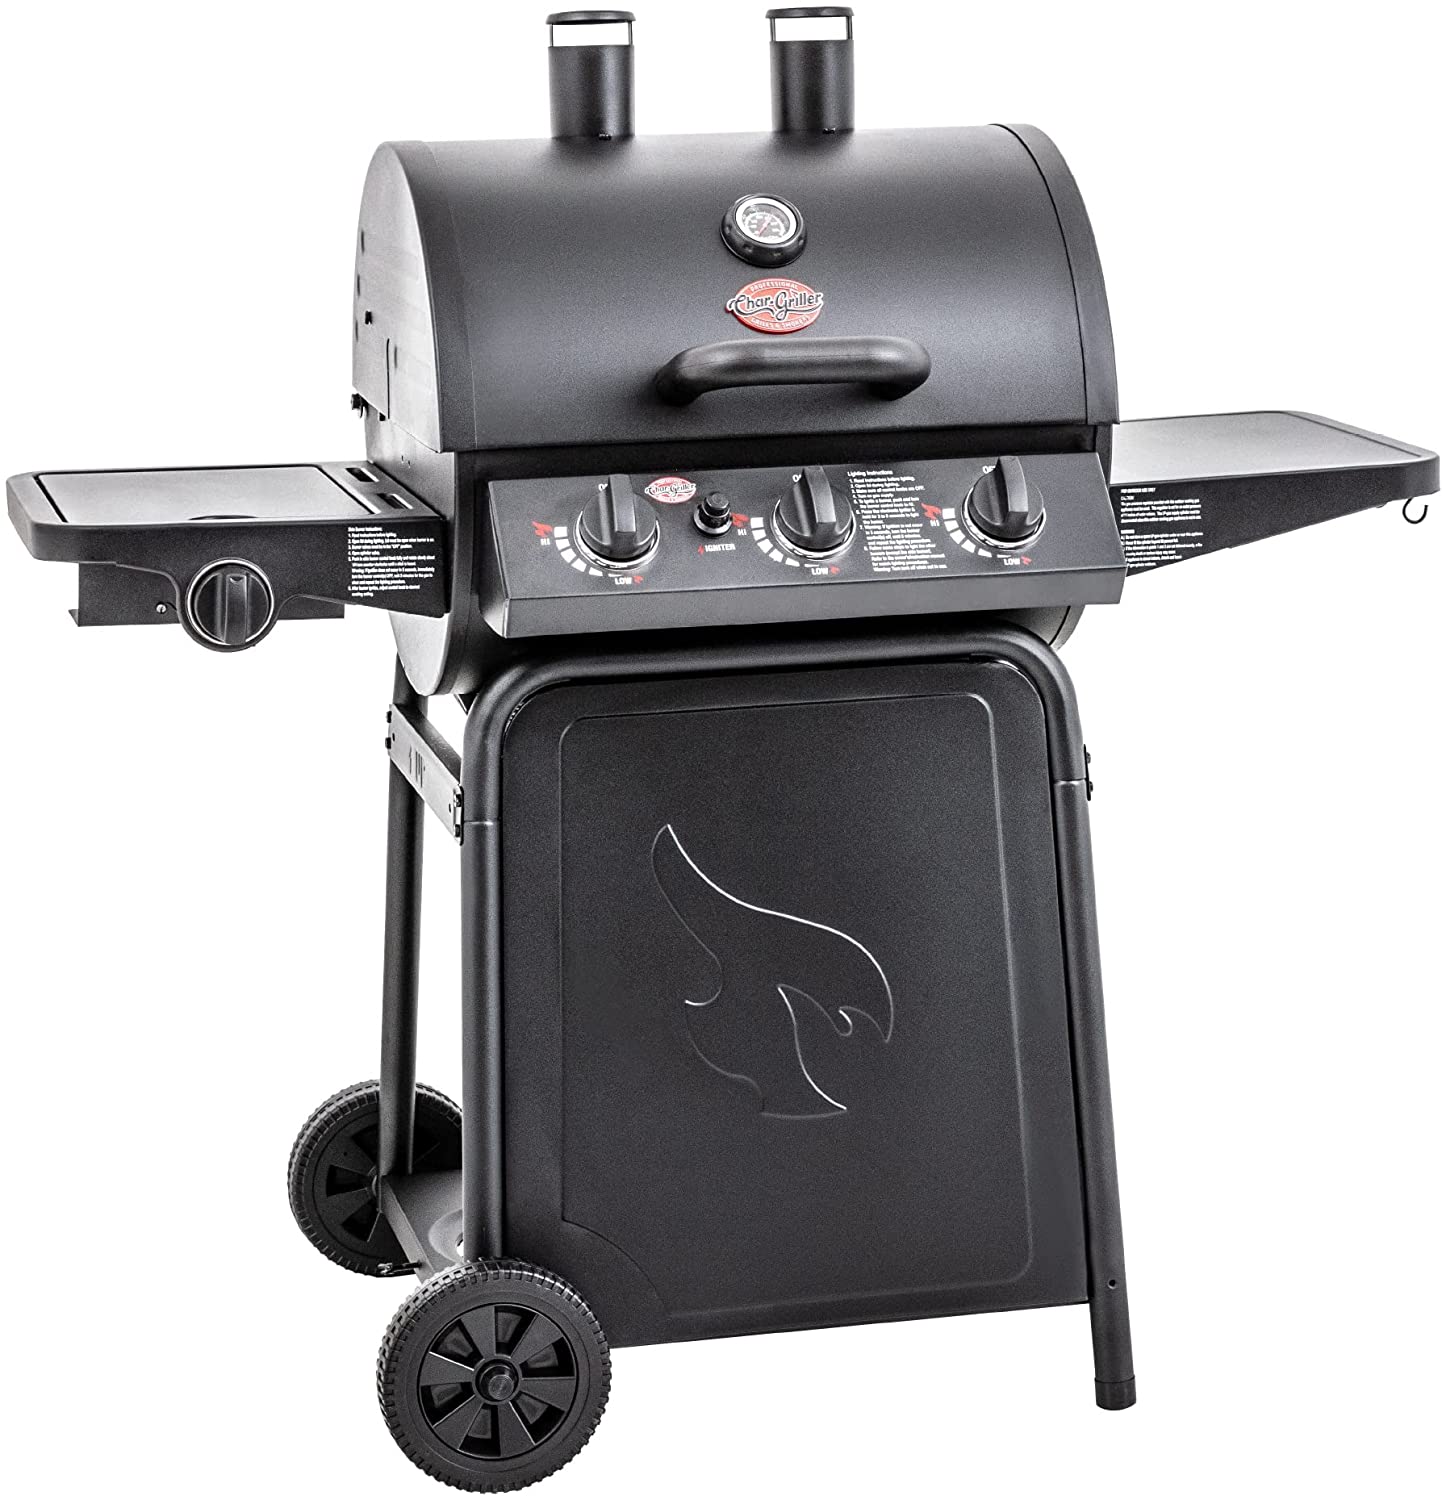 Char-Griller Grillin' Pro gas grill